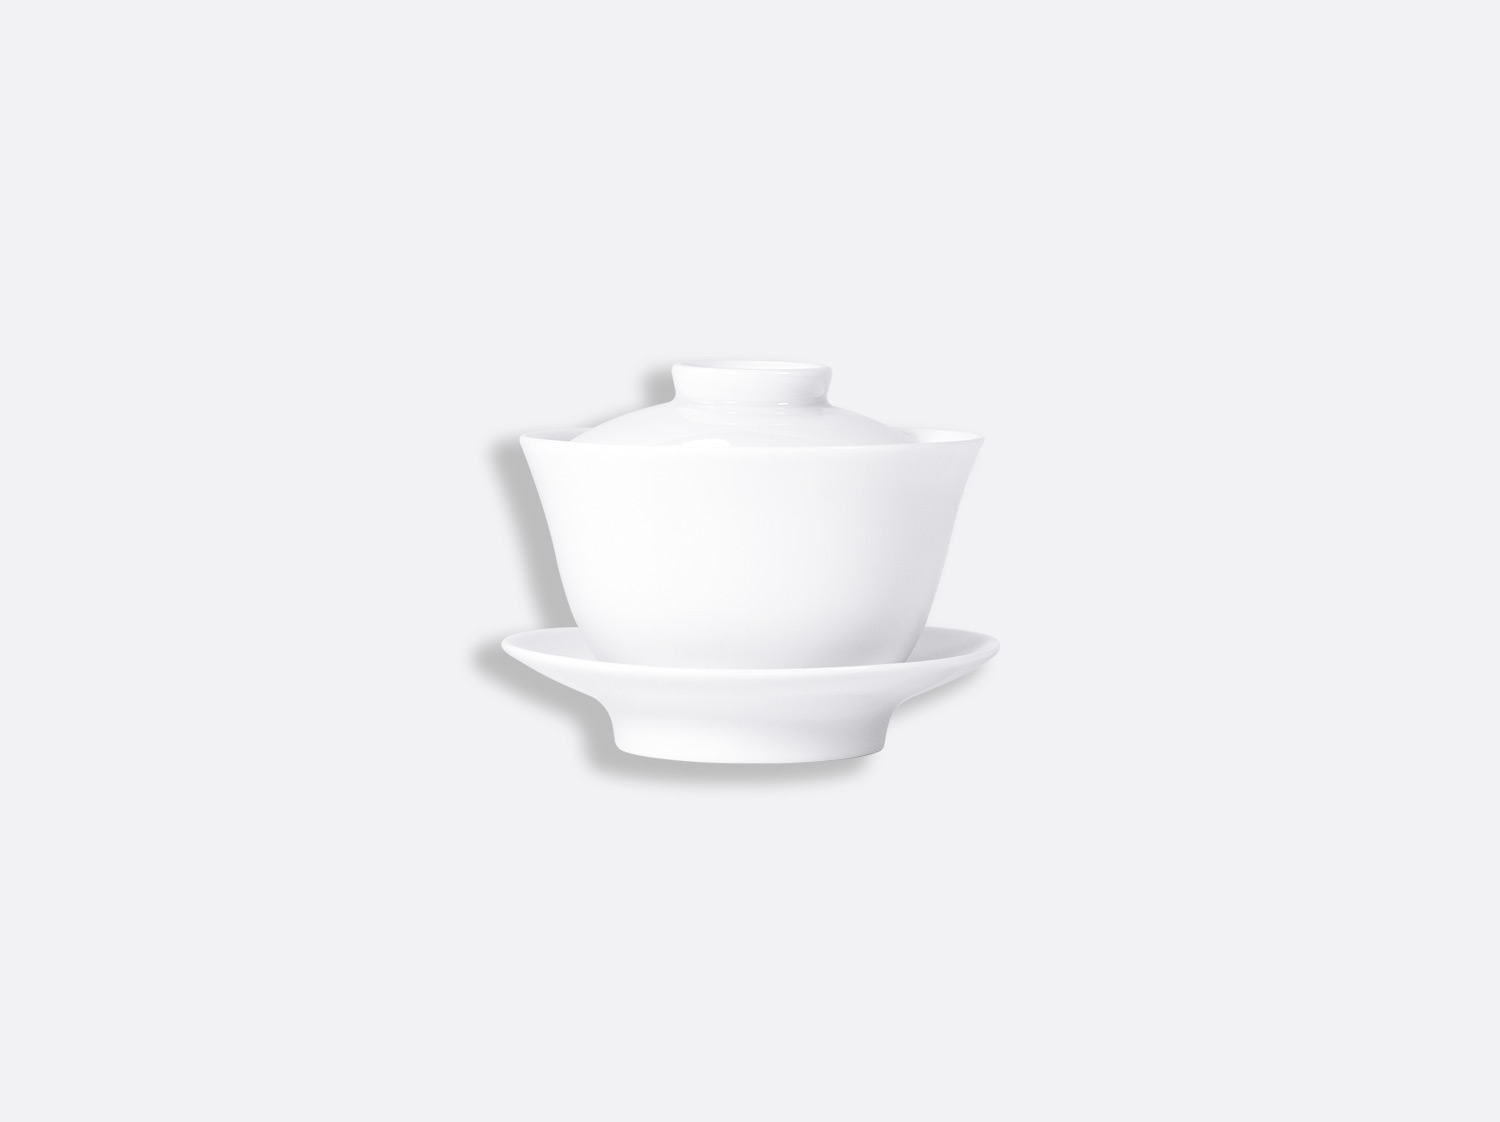 China Covered cup 20 cl of the collection Ji qing blanc | Bernardaud